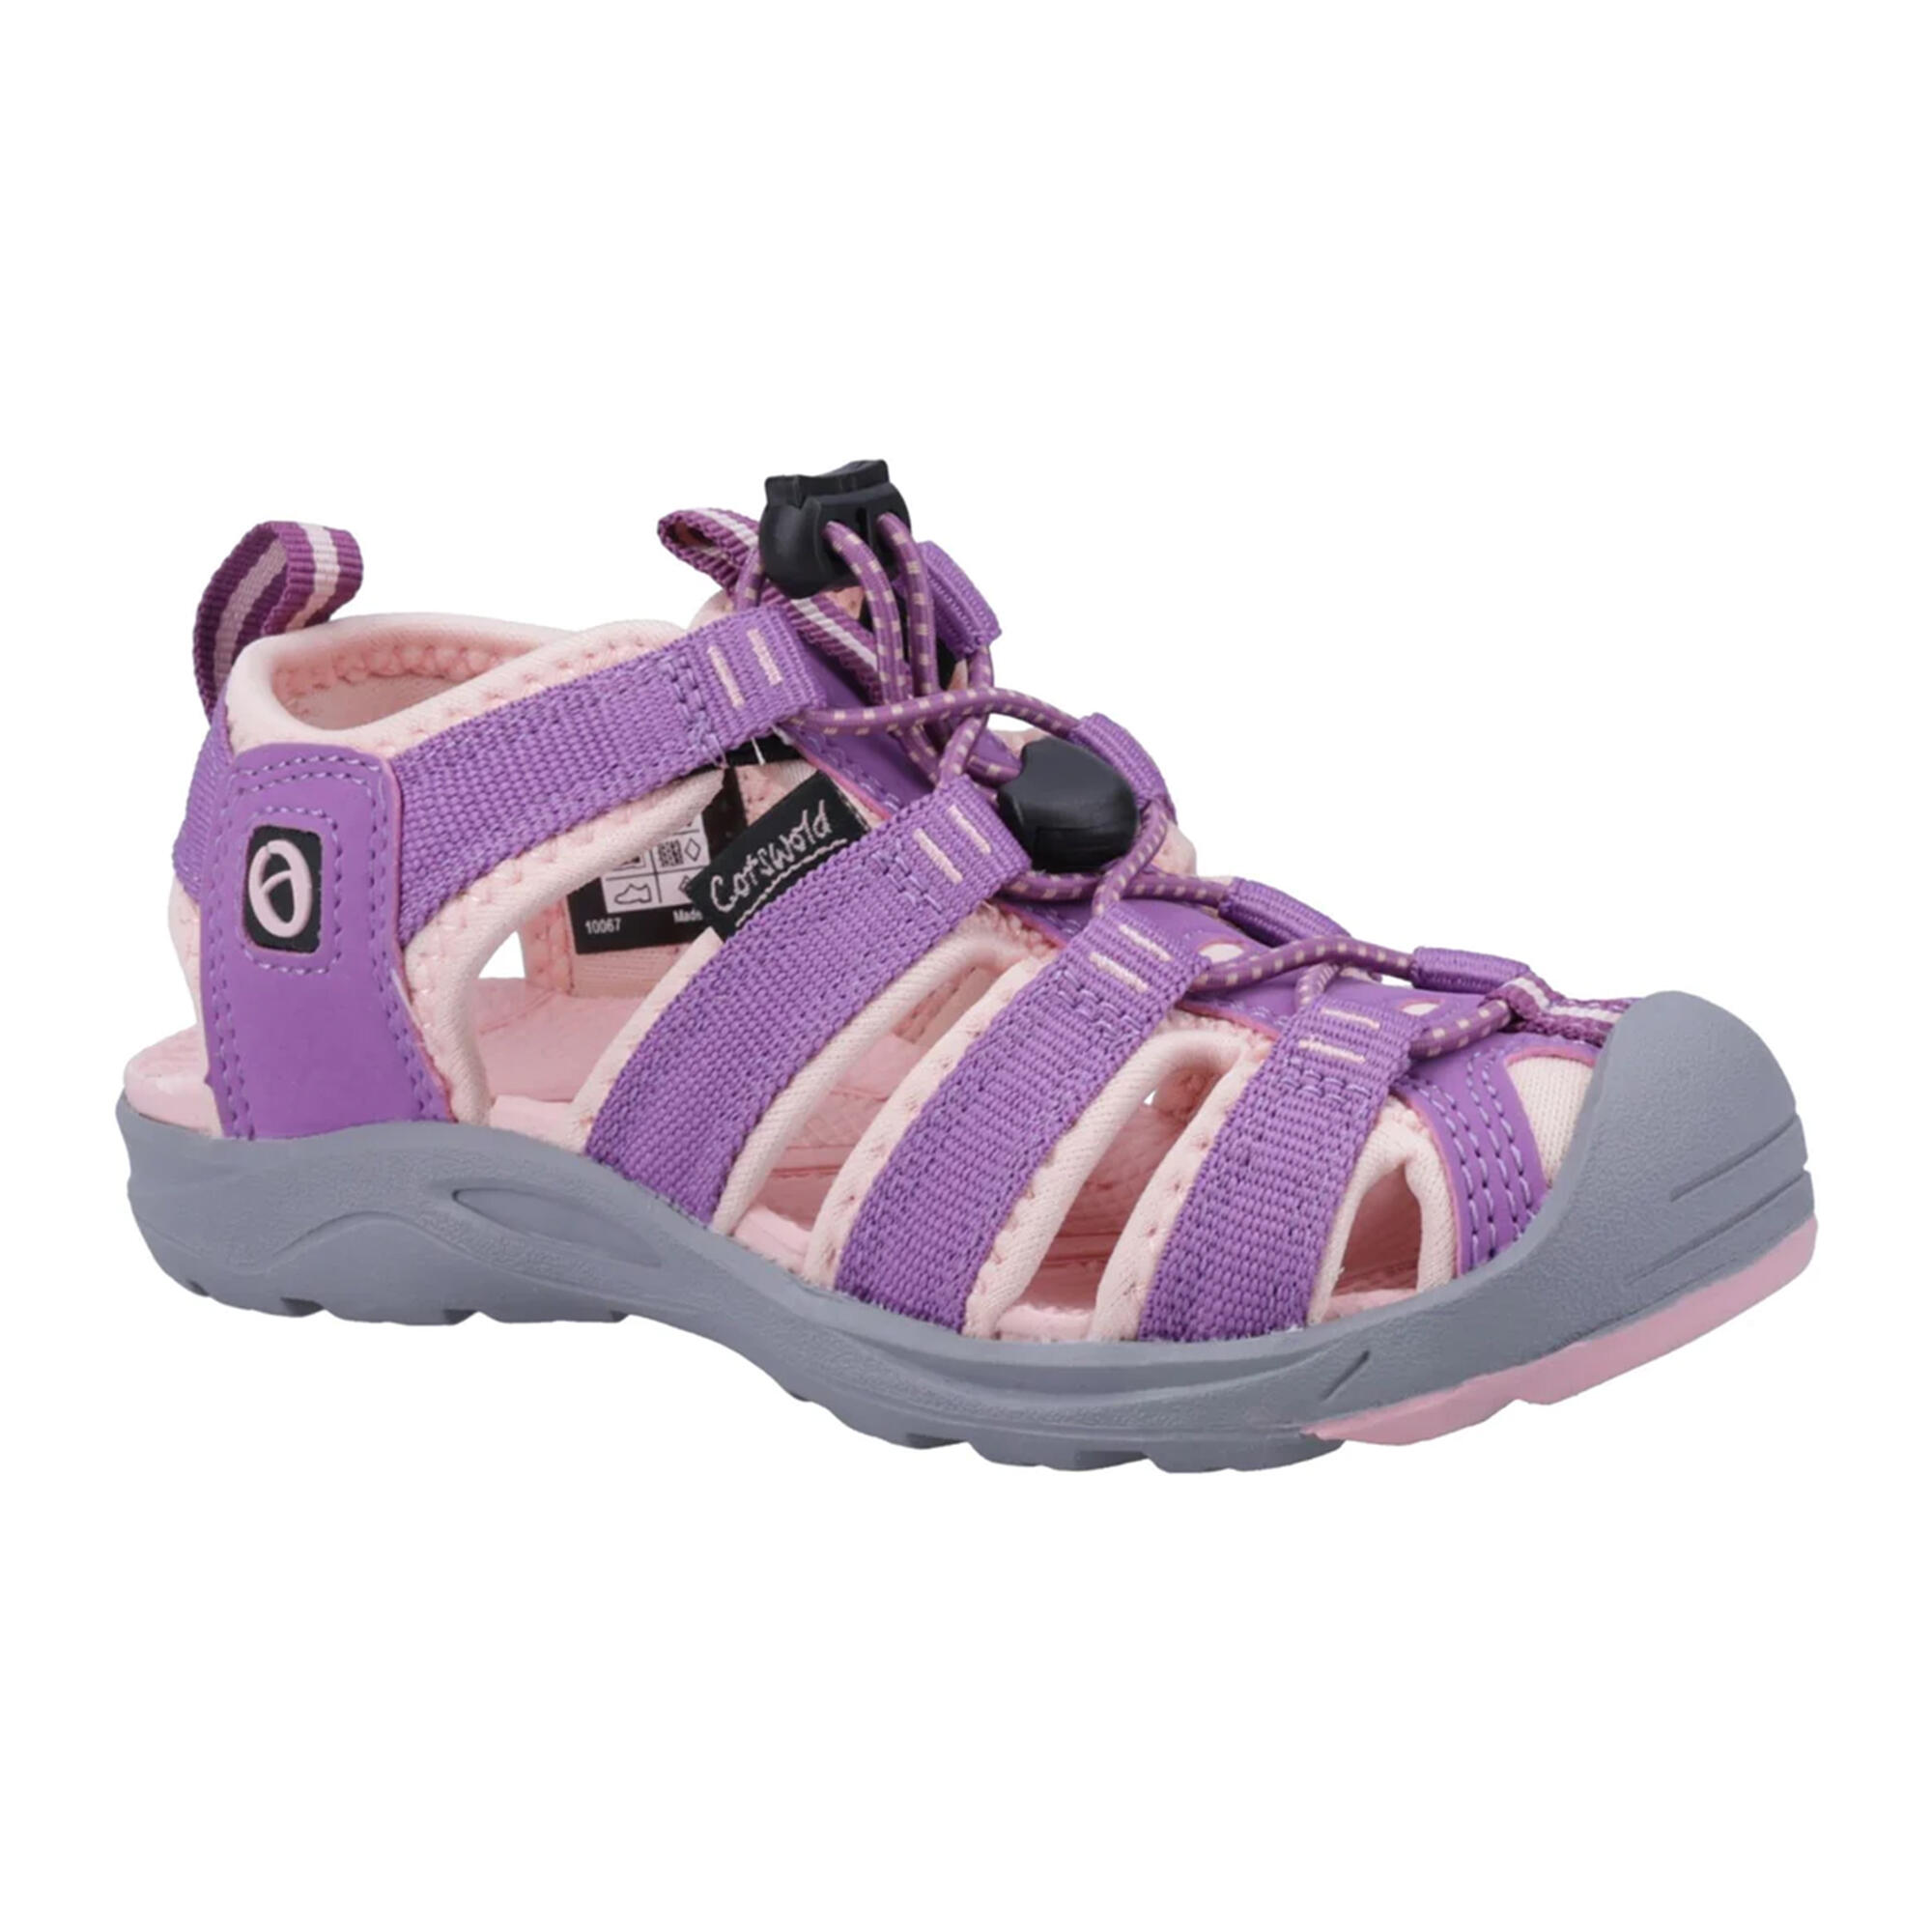 COTSWOLD Childrens/Kids Marshfield Recycled Sandals (Purple/Pink)